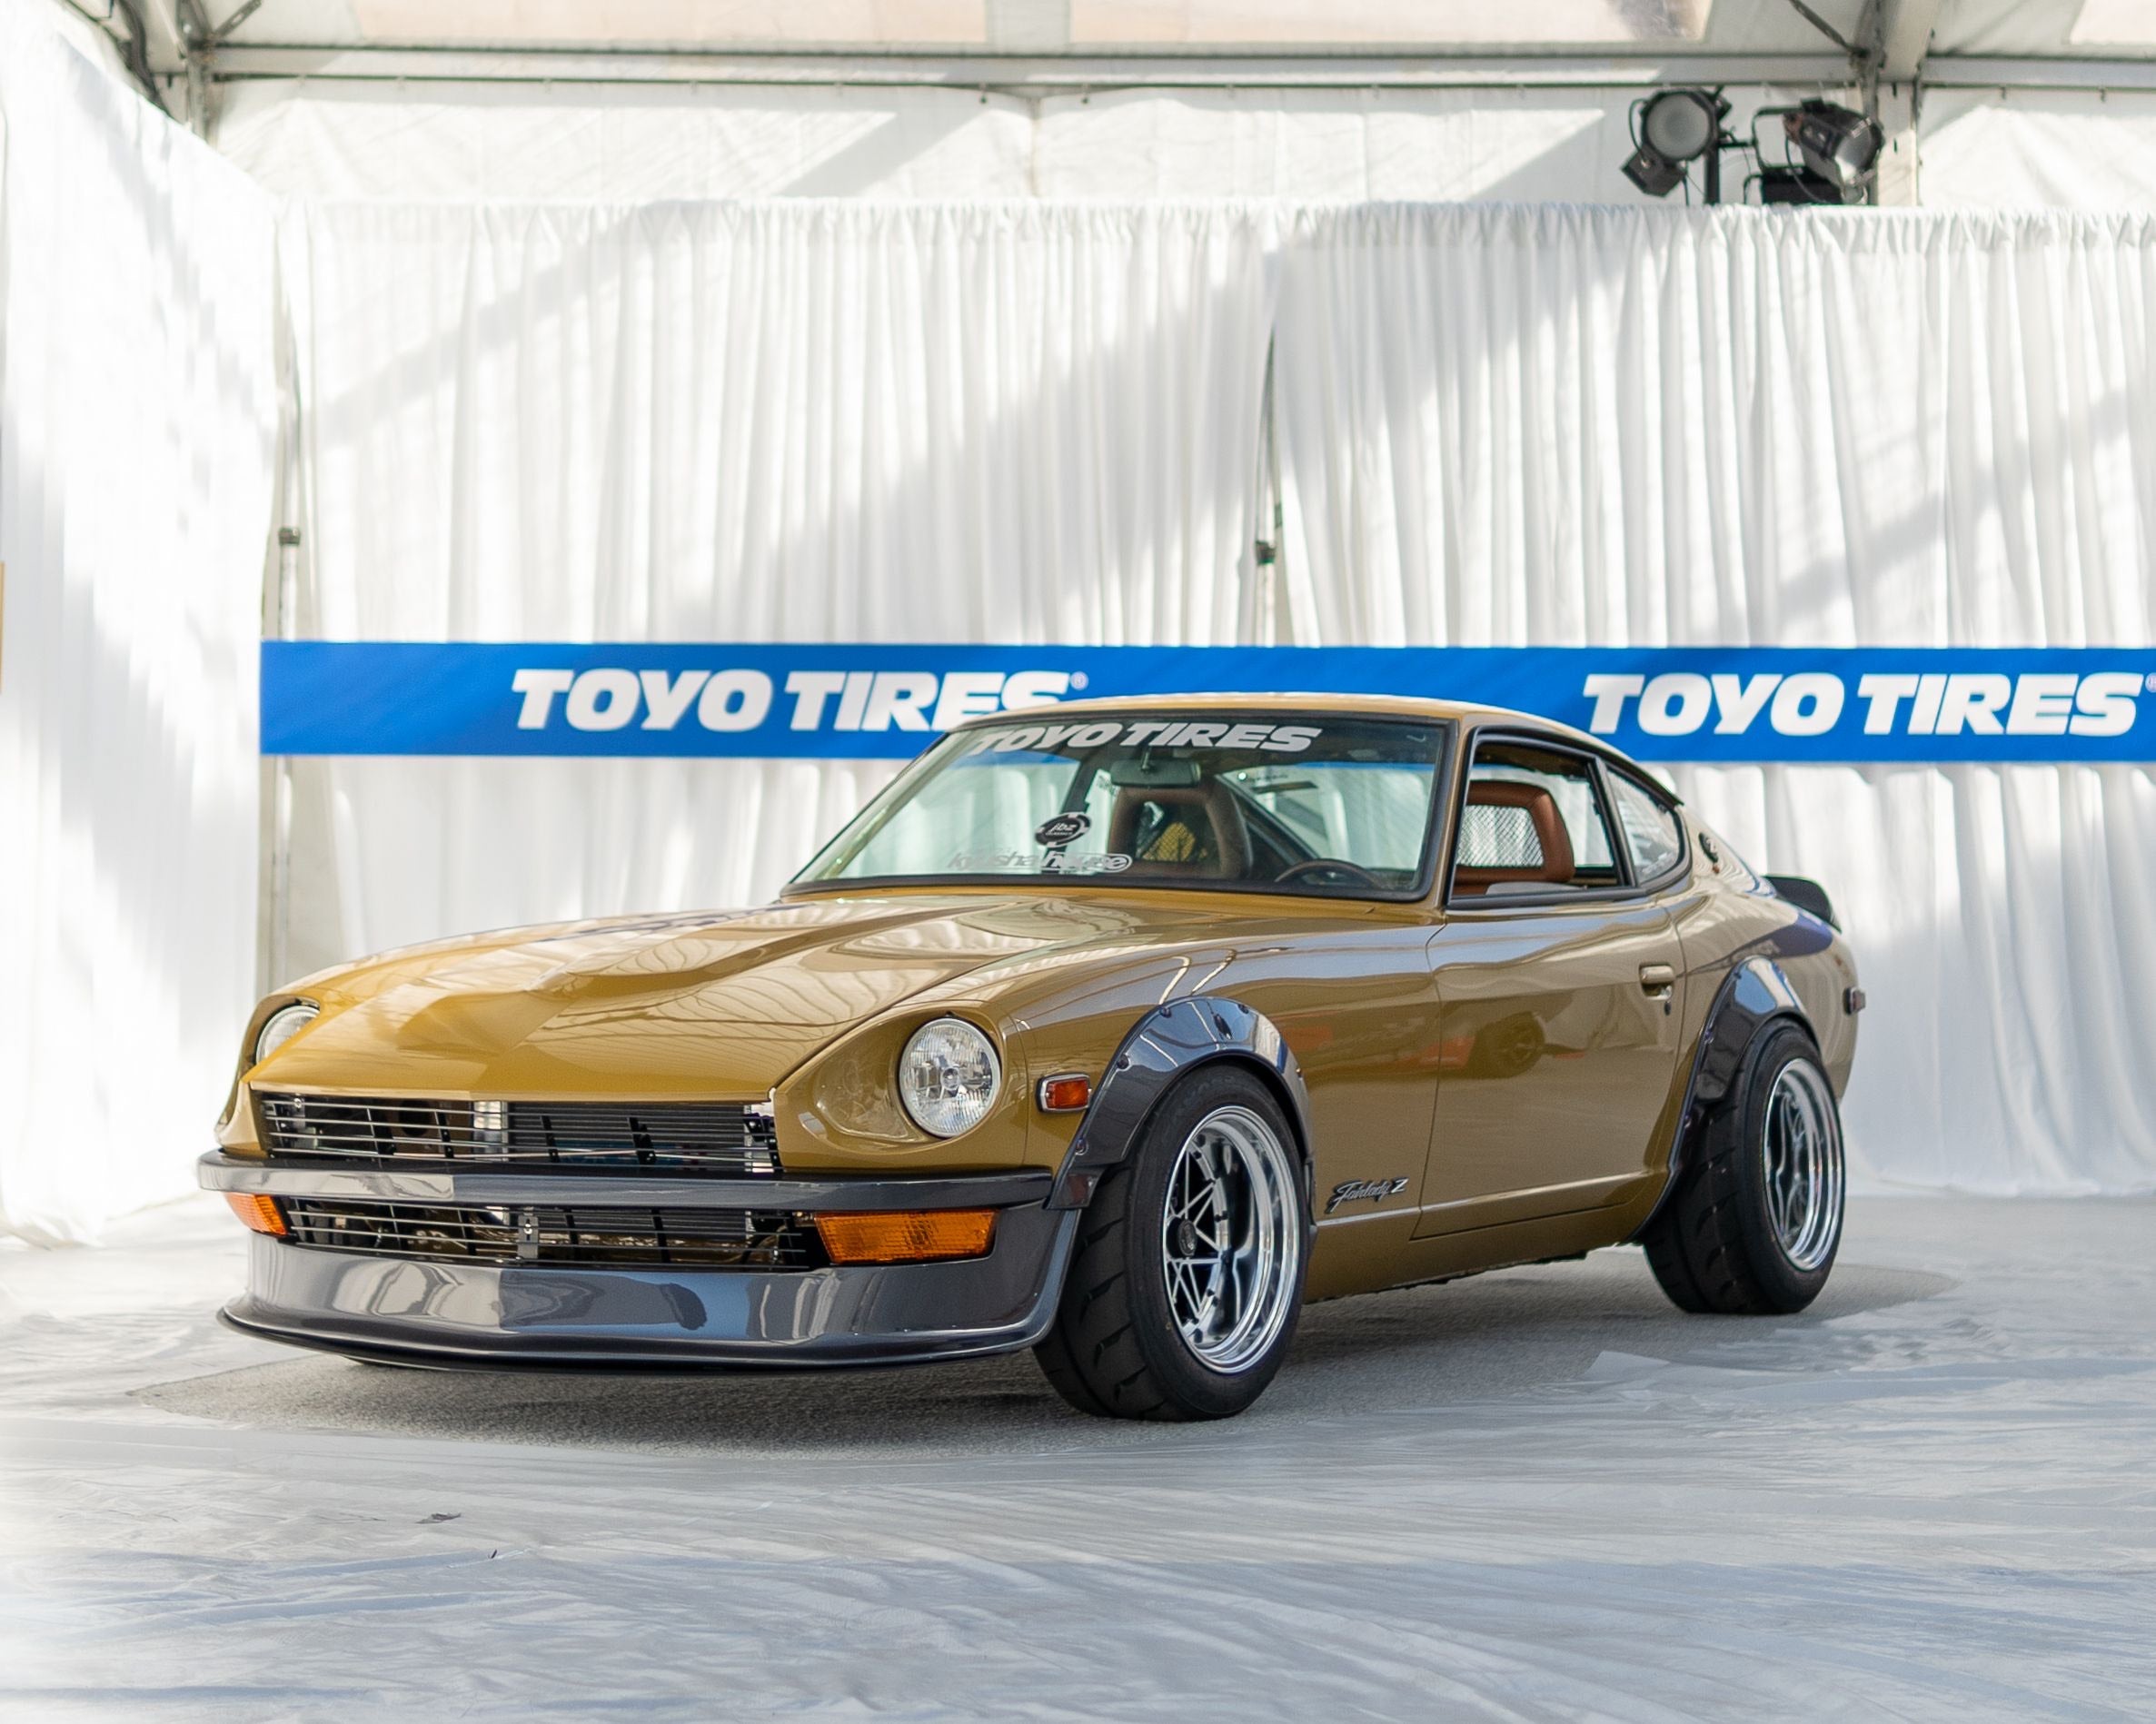 240z exterior. Owner: @roost_lyf || Photo: @pillow.pants